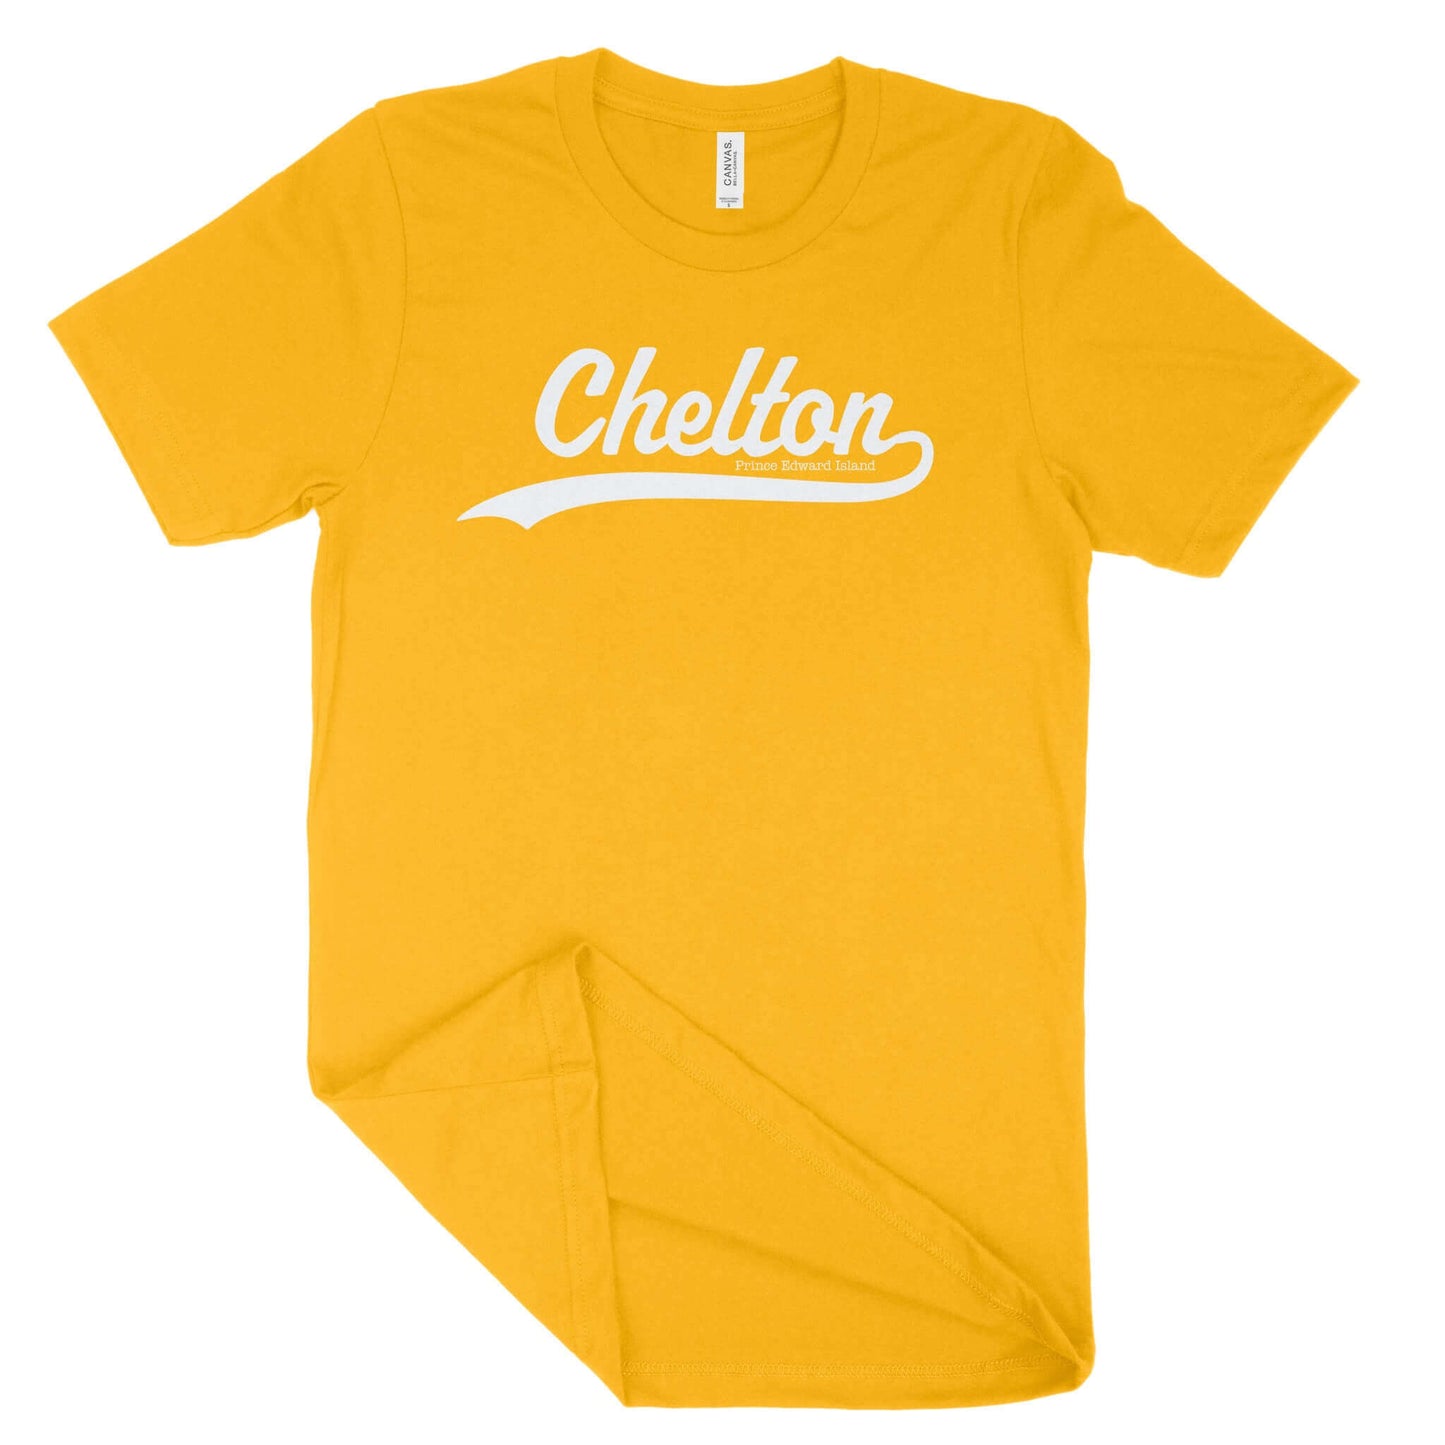 Chelton Unisex T-Shirt from East Coast AF Apparel